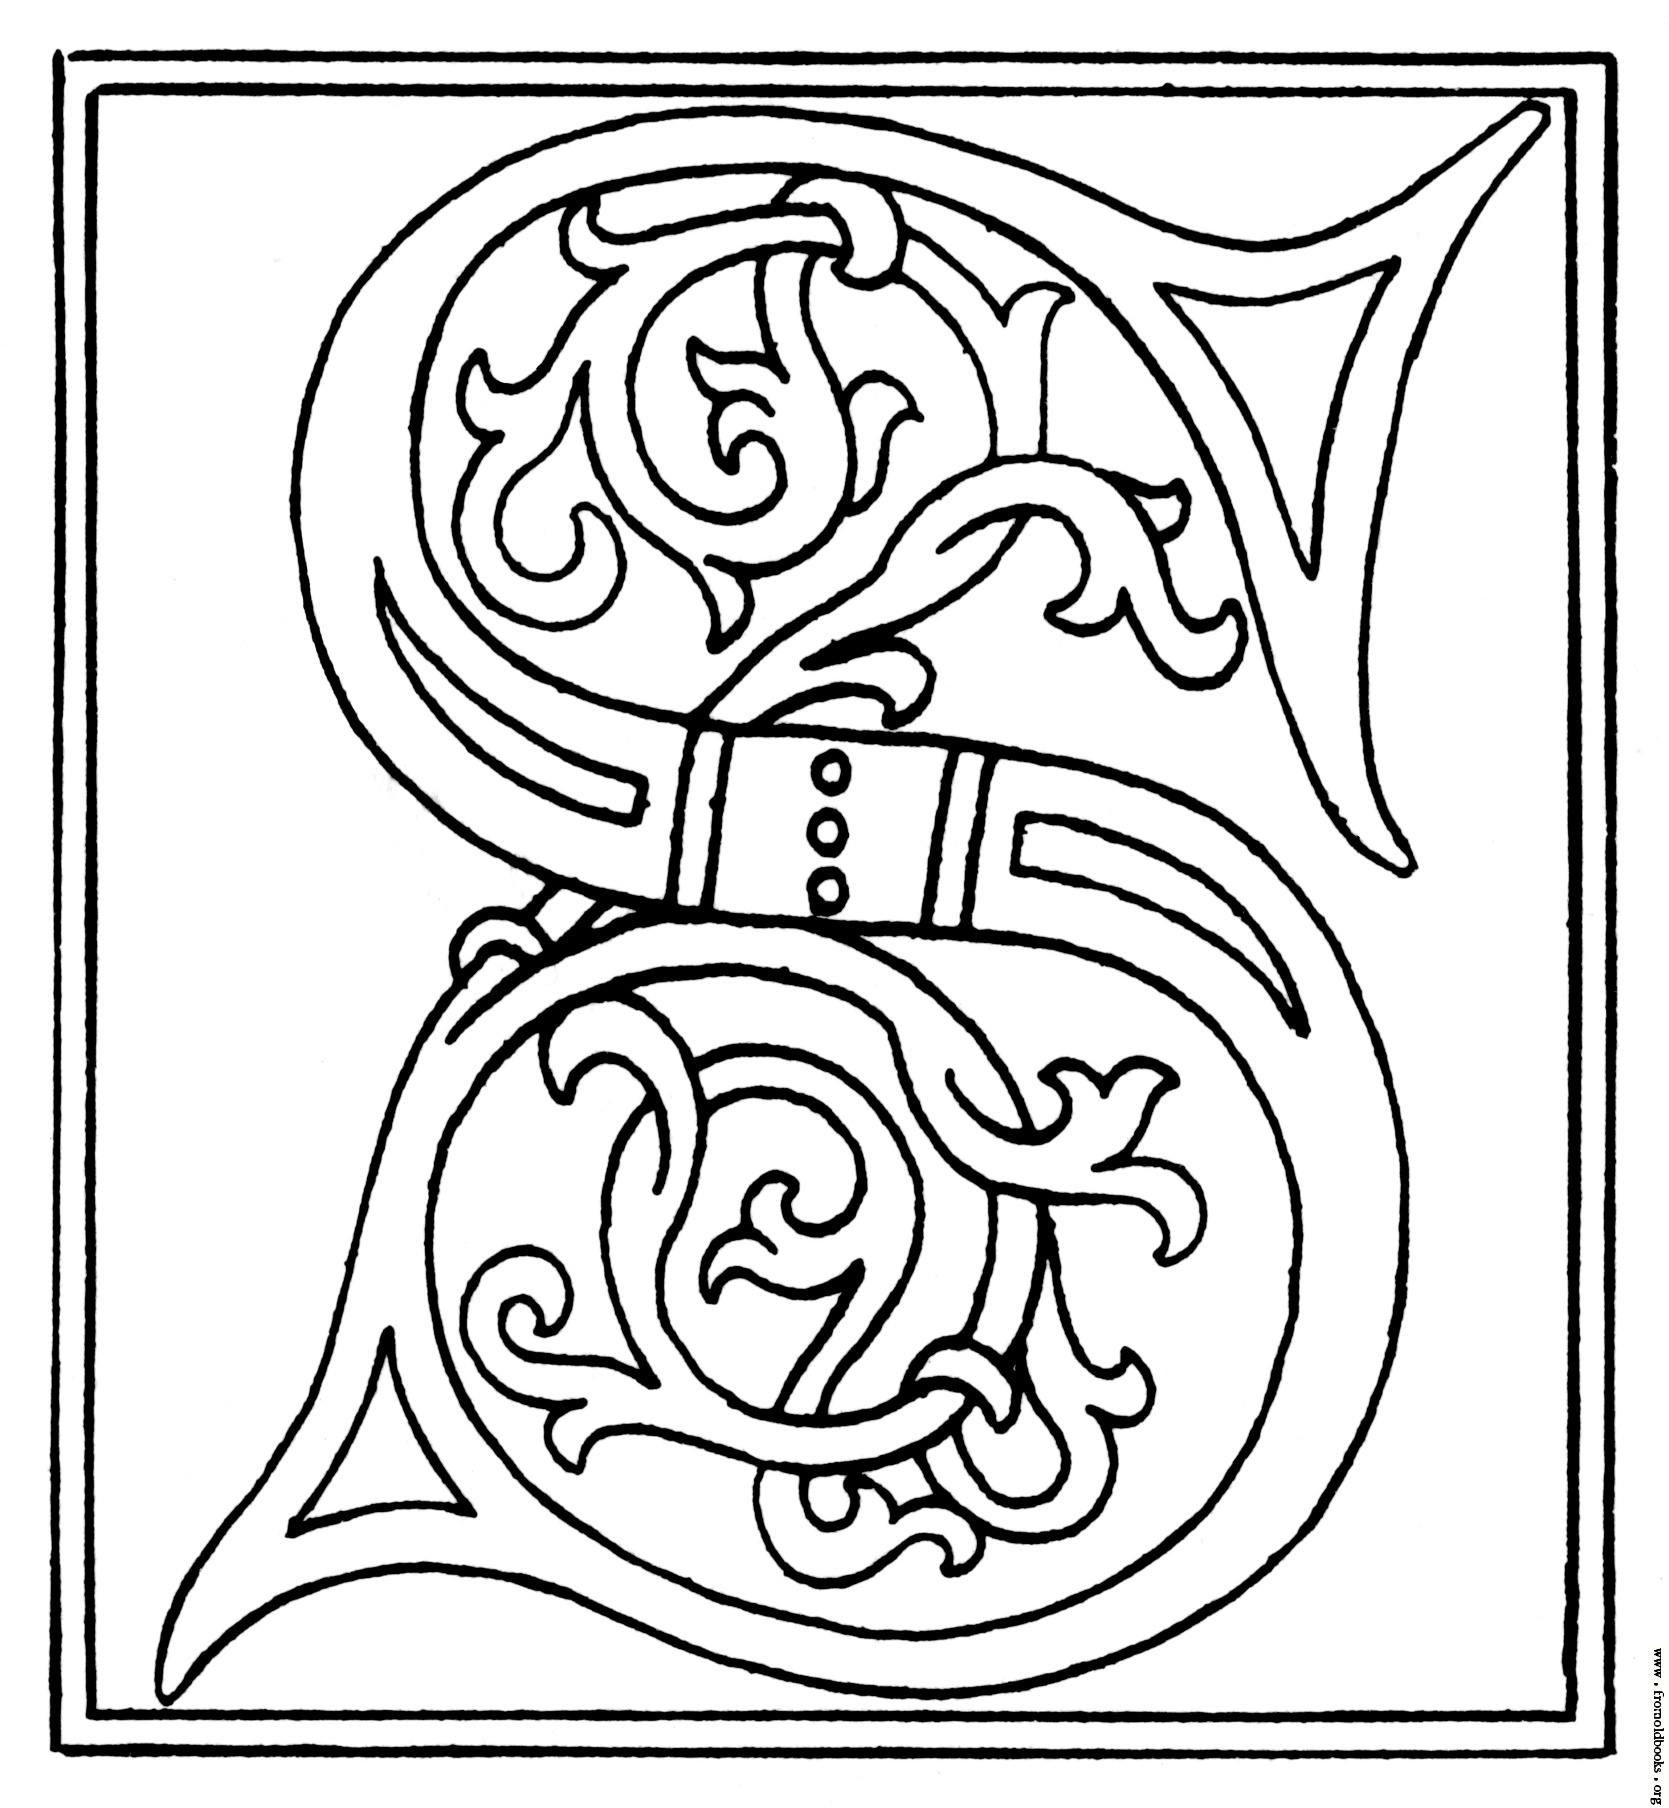 clipart: initial letter S from late 15th century printed book ...